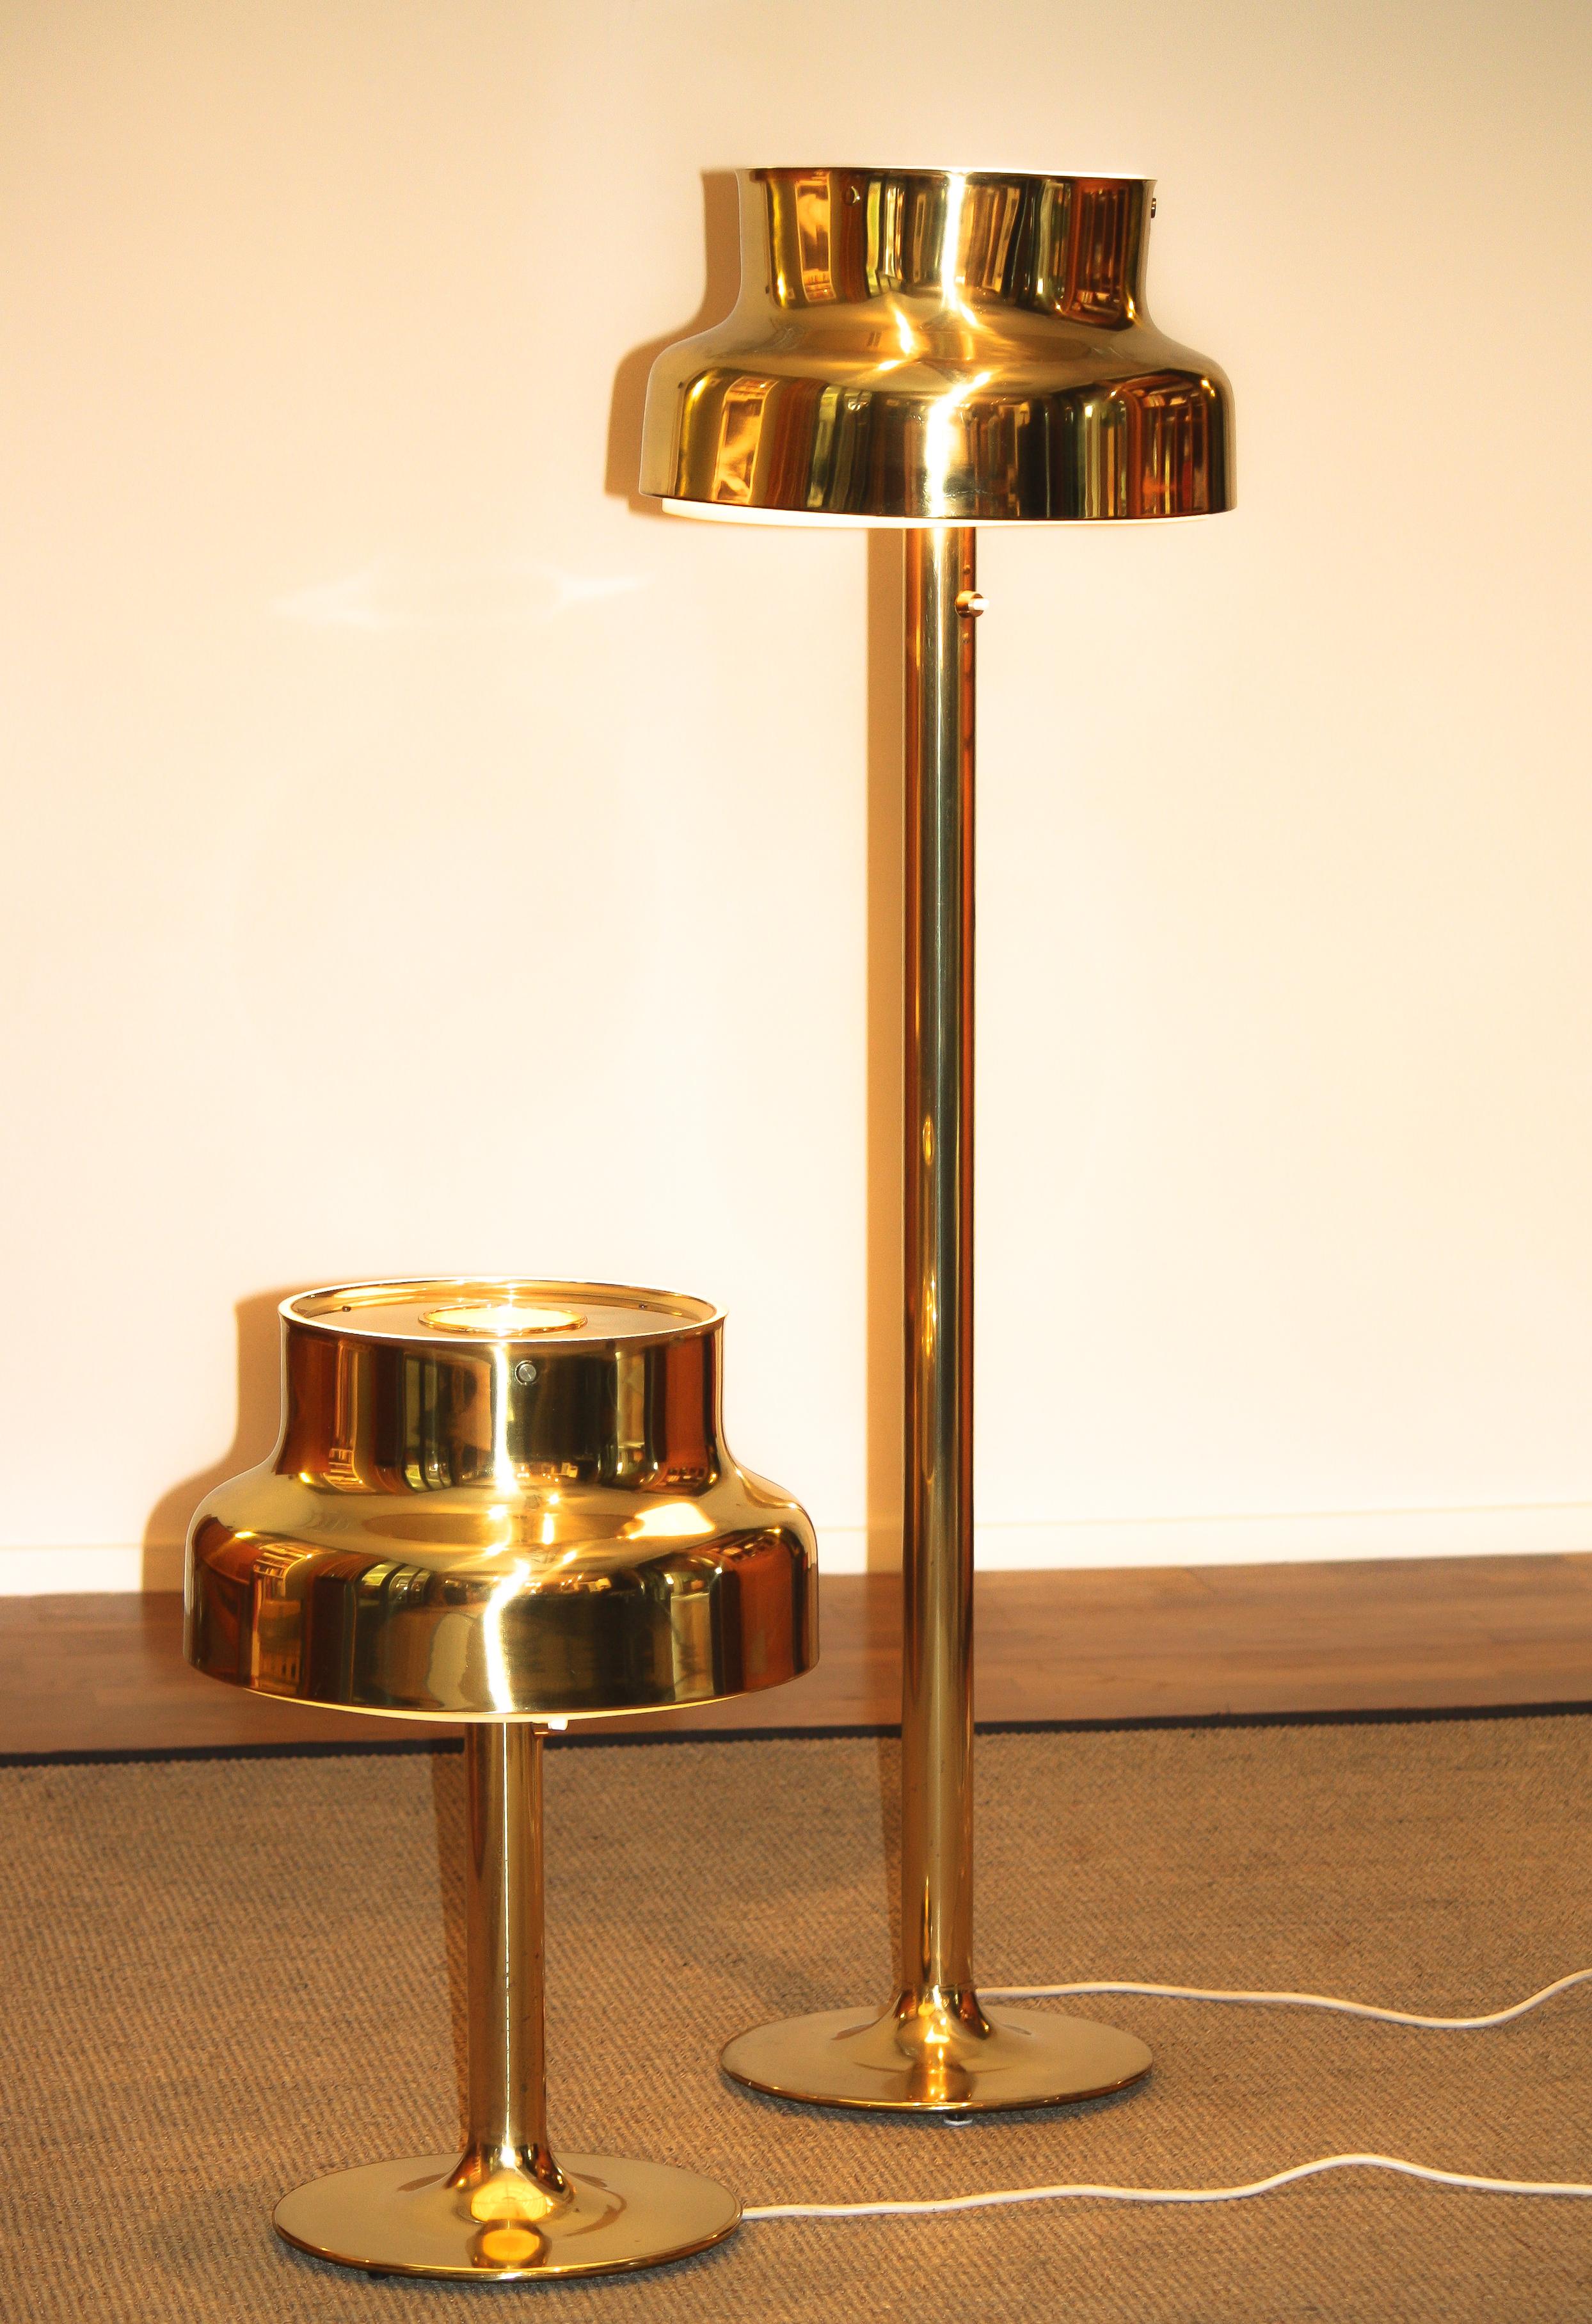 1960s Golden or Brass Floor Lamp by Anders Pehrson ‘Bumling’ for Ateljé Lyktan 4